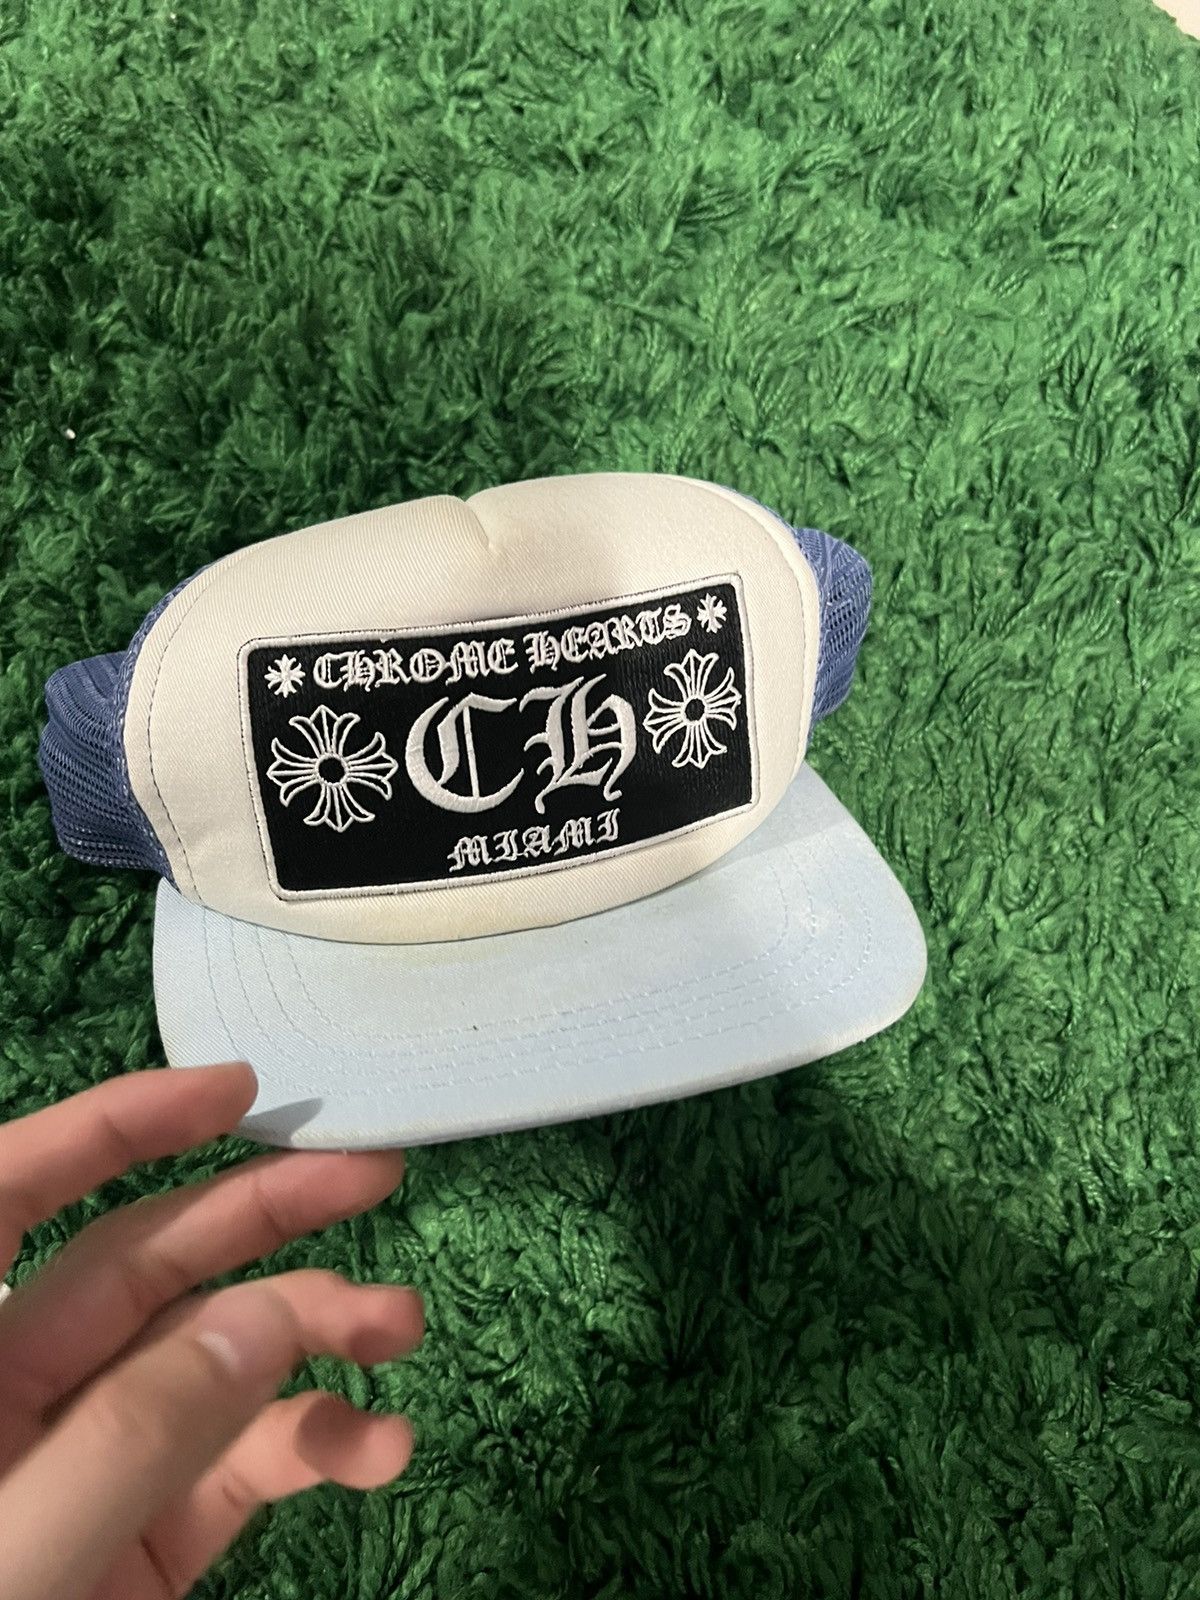 Pre-owned Chrome Hearts Baby Blue Miami Music Week Trucker